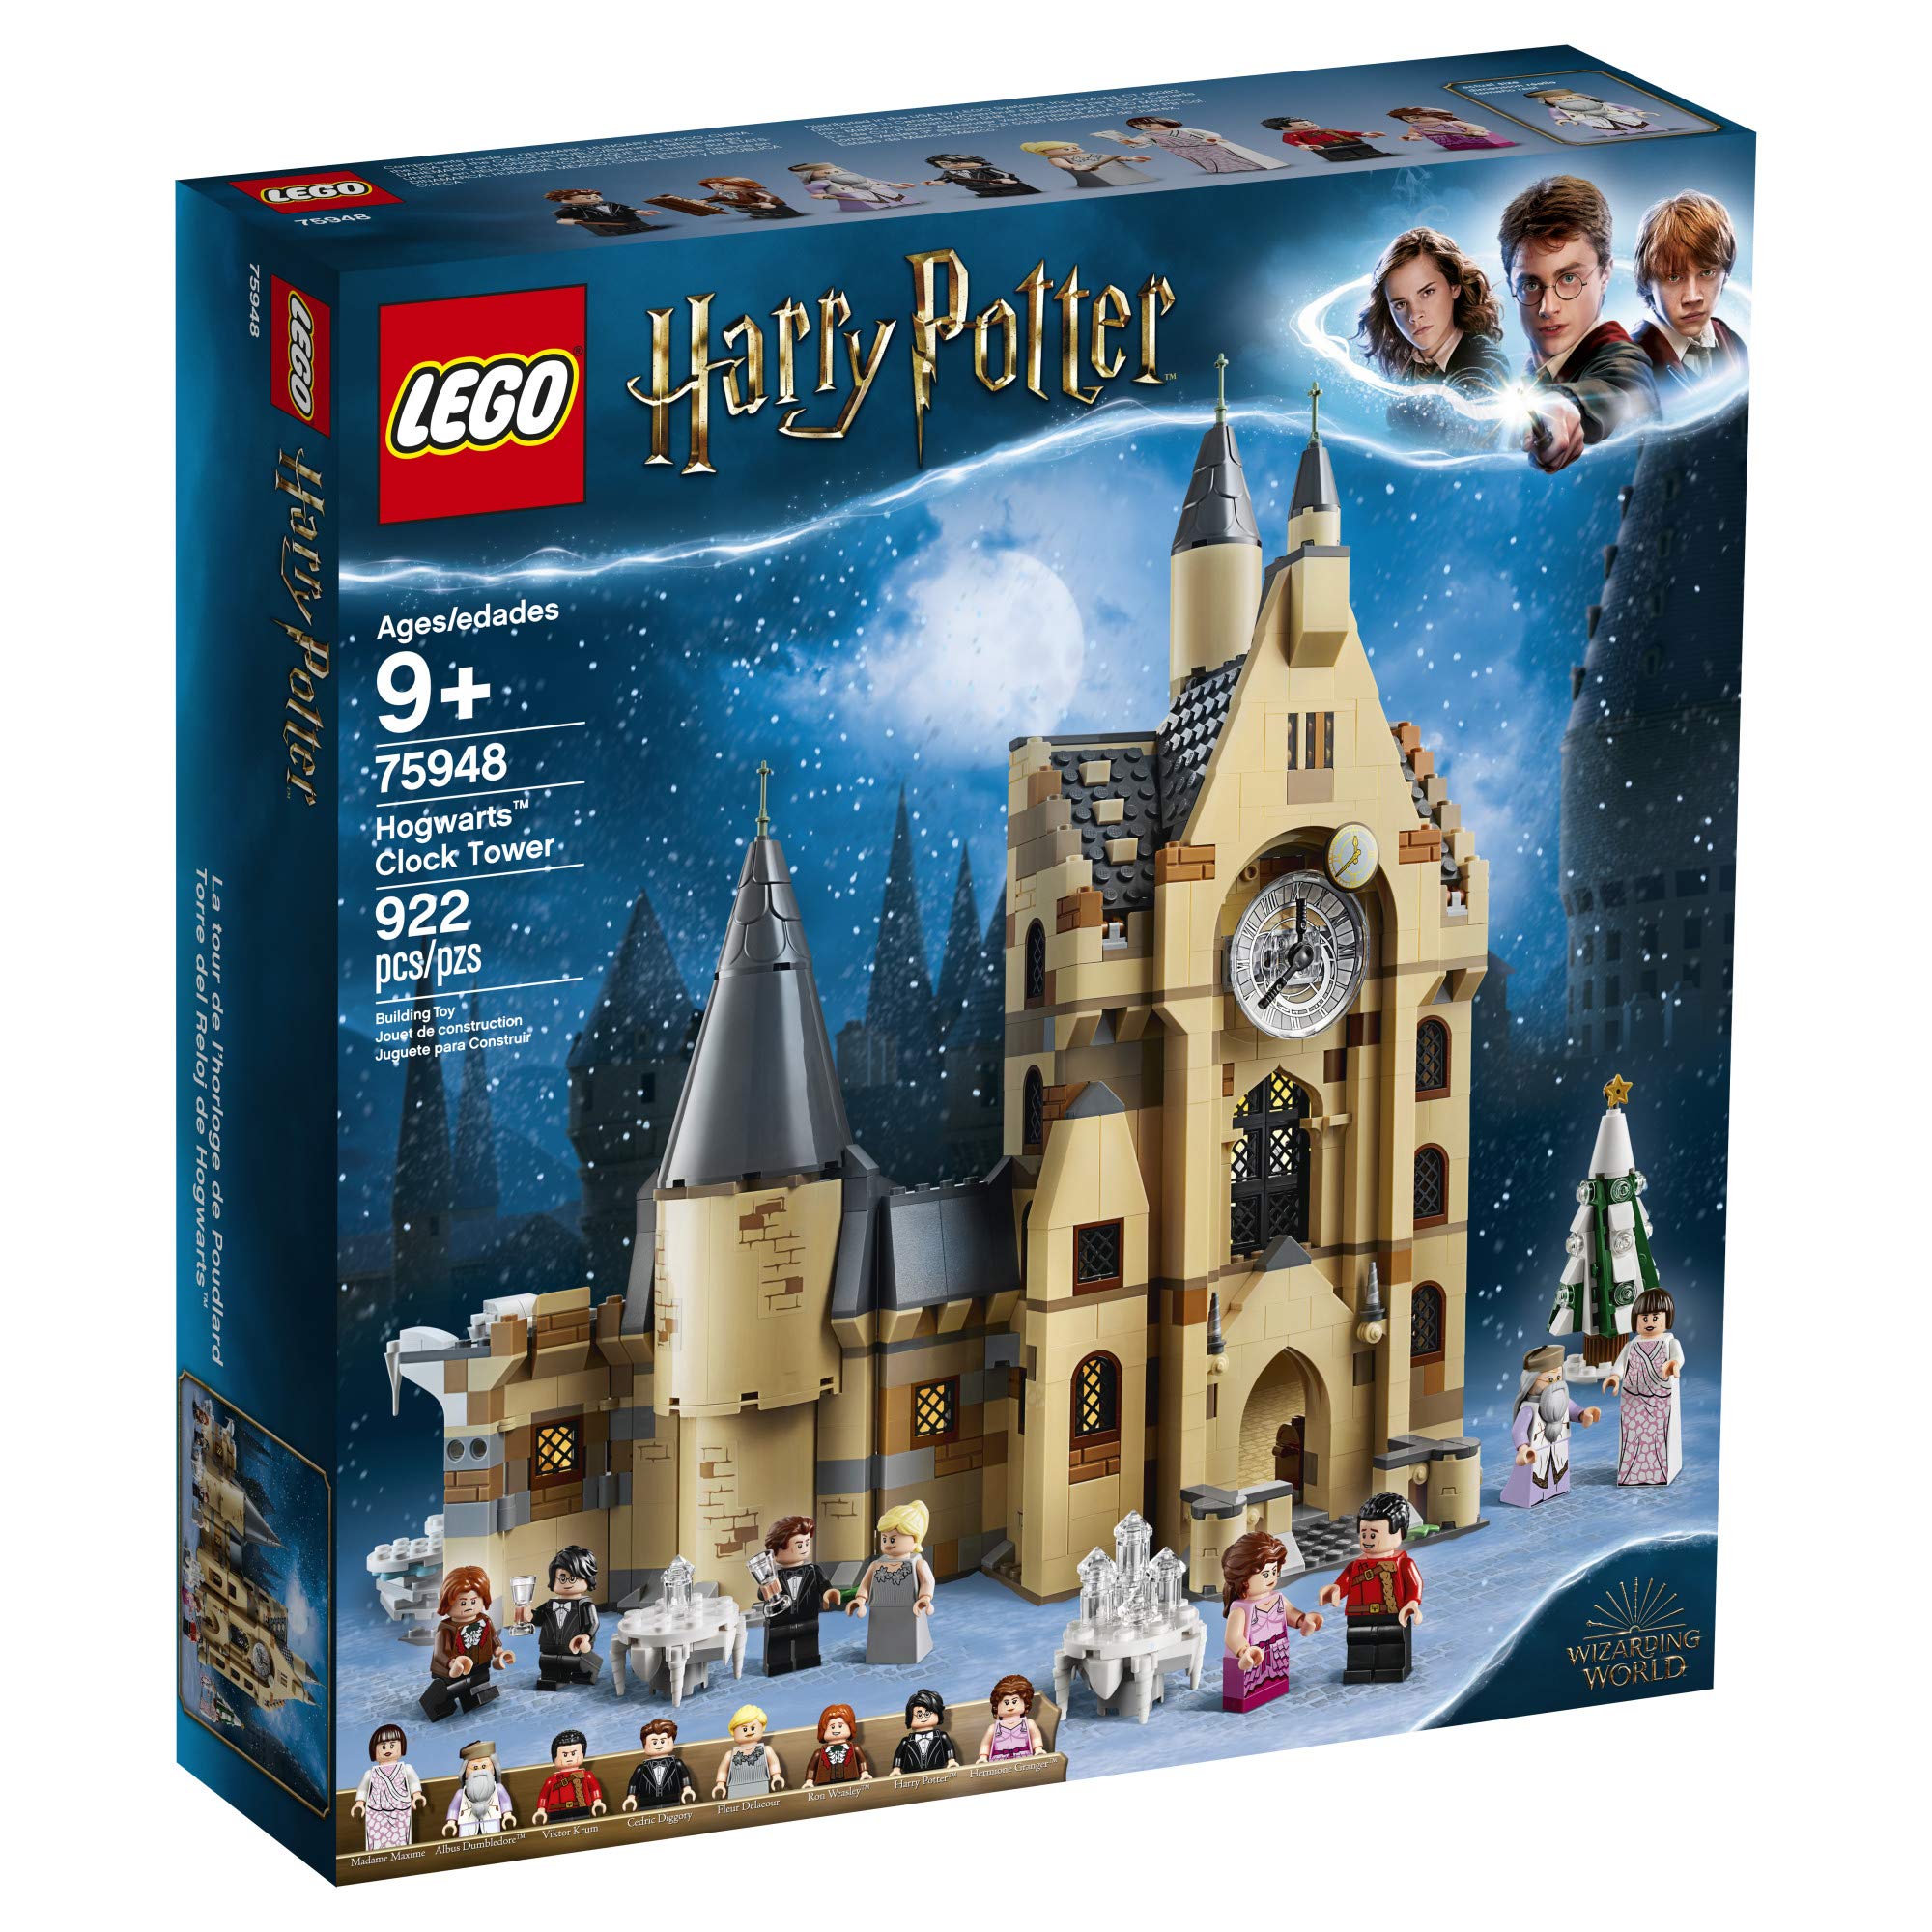 LEGO Harry Potter Hogwarts Clock Tower 75948 Build and Play Tower Set with Harry Potter Minifigures, Popular Harry Potter Gift and Playset with Ron Weasley, Hermione Granger and more (922 Pieces)